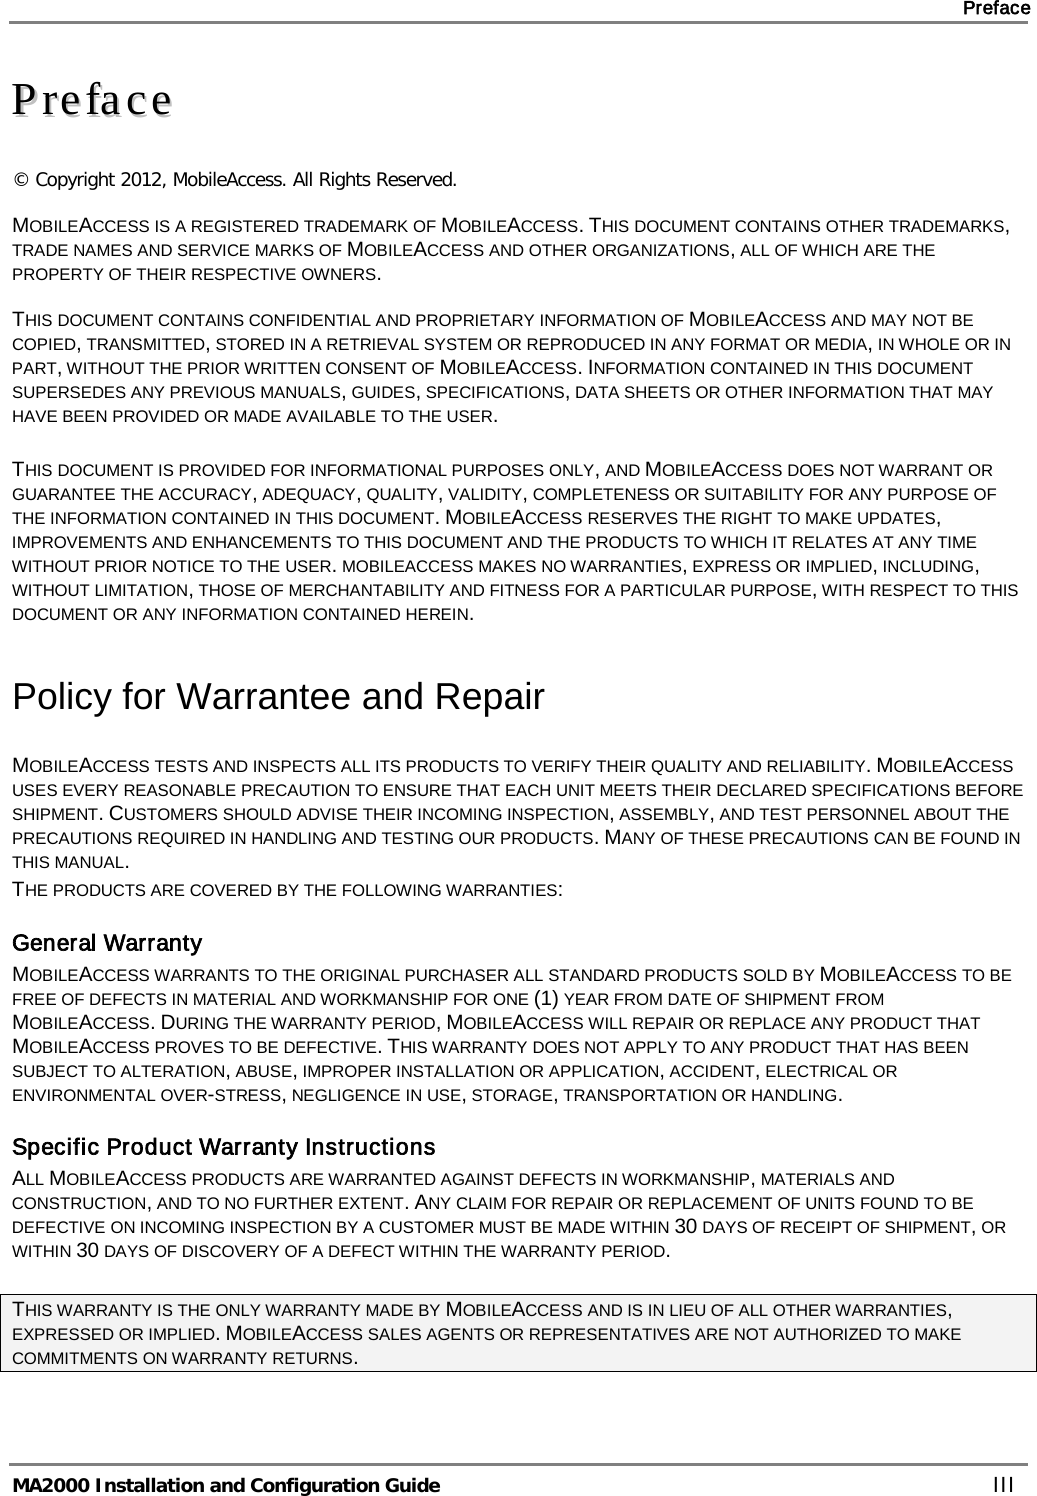     Preface       MA2000 Installation and Configuration Guide    III PPrreeffaaccee  © Copyright 2012, MobileAccess. All Rights Reserved.  MOBILEACCESS IS A REGISTERED TRADEMARK OF MOBILEACCESS. THIS DOCUMENT CONTAINS OTHER TRADEMARKS, TRADE NAMES AND SERVICE MARKS OF MOBILEACCESS AND OTHER ORGANIZATIONS, ALL OF WHICH ARE THE PROPERTY OF THEIR RESPECTIVE OWNERS.    THIS DOCUMENT CONTAINS CONFIDENTIAL AND PROPRIETARY INFORMATION OF MOBILEACCESS AND MAY NOT BE COPIED, TRANSMITTED, STORED IN A RETRIEVAL SYSTEM OR REPRODUCED IN ANY FORMAT OR MEDIA, IN WHOLE OR IN PART, WITHOUT THE PRIOR WRITTEN CONSENT OF MOBILEACCESS. INFORMATION CONTAINED IN THIS DOCUMENT SUPERSEDES ANY PREVIOUS MANUALS, GUIDES, SPECIFICATIONS, DATA SHEETS OR OTHER INFORMATION THAT MAY HAVE BEEN PROVIDED OR MADE AVAILABLE TO THE USER.   THIS DOCUMENT IS PROVIDED FOR INFORMATIONAL PURPOSES ONLY, AND MOBILEACCESS DOES NOT WARRANT OR GUARANTEE THE ACCURACY, ADEQUACY, QUALITY, VALIDITY, COMPLETENESS OR SUITABILITY FOR ANY PURPOSE OF THE INFORMATION CONTAINED IN THIS DOCUMENT. MOBILEACCESS RESERVES THE RIGHT TO MAKE UPDATES, IMPROVEMENTS AND ENHANCEMENTS TO THIS DOCUMENT AND THE PRODUCTS TO WHICH IT RELATES AT ANY TIME WITHOUT PRIOR NOTICE TO THE USER. MOBILEACCESS MAKES NO WARRANTIES, EXPRESS OR IMPLIED, INCLUDING, WITHOUT LIMITATION, THOSE OF MERCHANTABILITY AND FITNESS FOR A PARTICULAR PURPOSE, WITH RESPECT TO THIS DOCUMENT OR ANY INFORMATION CONTAINED HEREIN. Policy for Warrantee and Repair MOBILEACCESS TESTS AND INSPECTS ALL ITS PRODUCTS TO VERIFY THEIR QUALITY AND RELIABILITY. MOBILEACCESS USES EVERY REASONABLE PRECAUTION TO ENSURE THAT EACH UNIT MEETS THEIR DECLARED SPECIFICATIONS BEFORE SHIPMENT. CUSTOMERS SHOULD ADVISE THEIR INCOMING INSPECTION, ASSEMBLY, AND TEST PERSONNEL ABOUT THE PRECAUTIONS REQUIRED IN HANDLING AND TESTING OUR PRODUCTS. MANY OF THESE PRECAUTIONS CAN BE FOUND IN THIS MANUAL. THE PRODUCTS ARE COVERED BY THE FOLLOWING WARRANTIES: General Warranty MOBILEACCESS WARRANTS TO THE ORIGINAL PURCHASER ALL STANDARD PRODUCTS SOLD BY MOBILEACCESS TO BE FREE OF DEFECTS IN MATERIAL AND WORKMANSHIP FOR ONE (1) YEAR FROM DATE OF SHIPMENT FROM MOBILEACCESS. DURING THE WARRANTY PERIOD, MOBILEACCESS WILL REPAIR OR REPLACE ANY PRODUCT THAT MOBILEACCESS PROVES TO BE DEFECTIVE. THIS WARRANTY DOES NOT APPLY TO ANY PRODUCT THAT HAS BEEN SUBJECT TO ALTERATION, ABUSE, IMPROPER INSTALLATION OR APPLICATION, ACCIDENT, ELECTRICAL OR ENVIRONMENTAL OVER-STRESS, NEGLIGENCE IN USE, STORAGE, TRANSPORTATION OR HANDLING. Specific Product Warranty Instructions ALL MOBILEACCESS PRODUCTS ARE WARRANTED AGAINST DEFECTS IN WORKMANSHIP, MATERIALS AND CONSTRUCTION, AND TO NO FURTHER EXTENT. ANY CLAIM FOR REPAIR OR REPLACEMENT OF UNITS FOUND TO BE DEFECTIVE ON INCOMING INSPECTION BY A CUSTOMER MUST BE MADE WITHIN 30 DAYS OF RECEIPT OF SHIPMENT, OR WITHIN 30 DAYS OF DISCOVERY OF A DEFECT WITHIN THE WARRANTY PERIOD.  THIS WARRANTY IS THE ONLY WARRANTY MADE BY MOBILEACCESS AND IS IN LIEU OF ALL OTHER WARRANTIES, EXPRESSED OR IMPLIED. MOBILEACCESS SALES AGENTS OR REPRESENTATIVES ARE NOT AUTHORIZED TO MAKE COMMITMENTS ON WARRANTY RETURNS.    